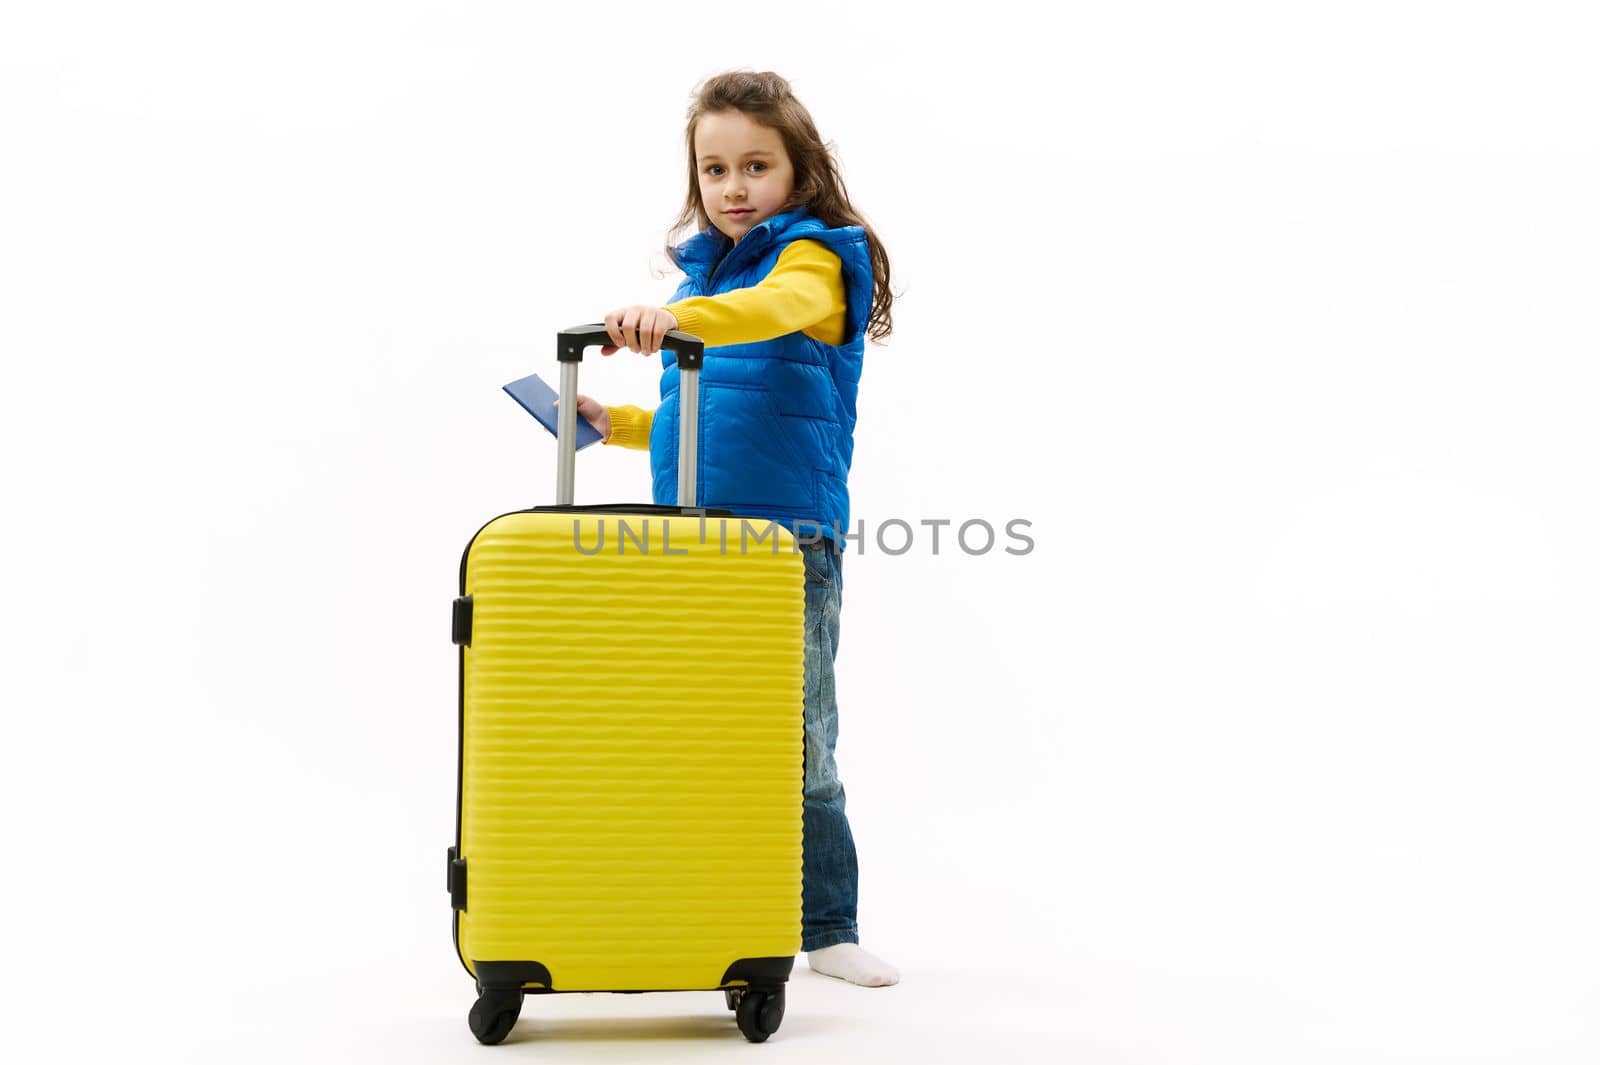 Traveler little child girl, in blue down jacket, with yellow suitcase and boarding pass, isolated on white background by artgf